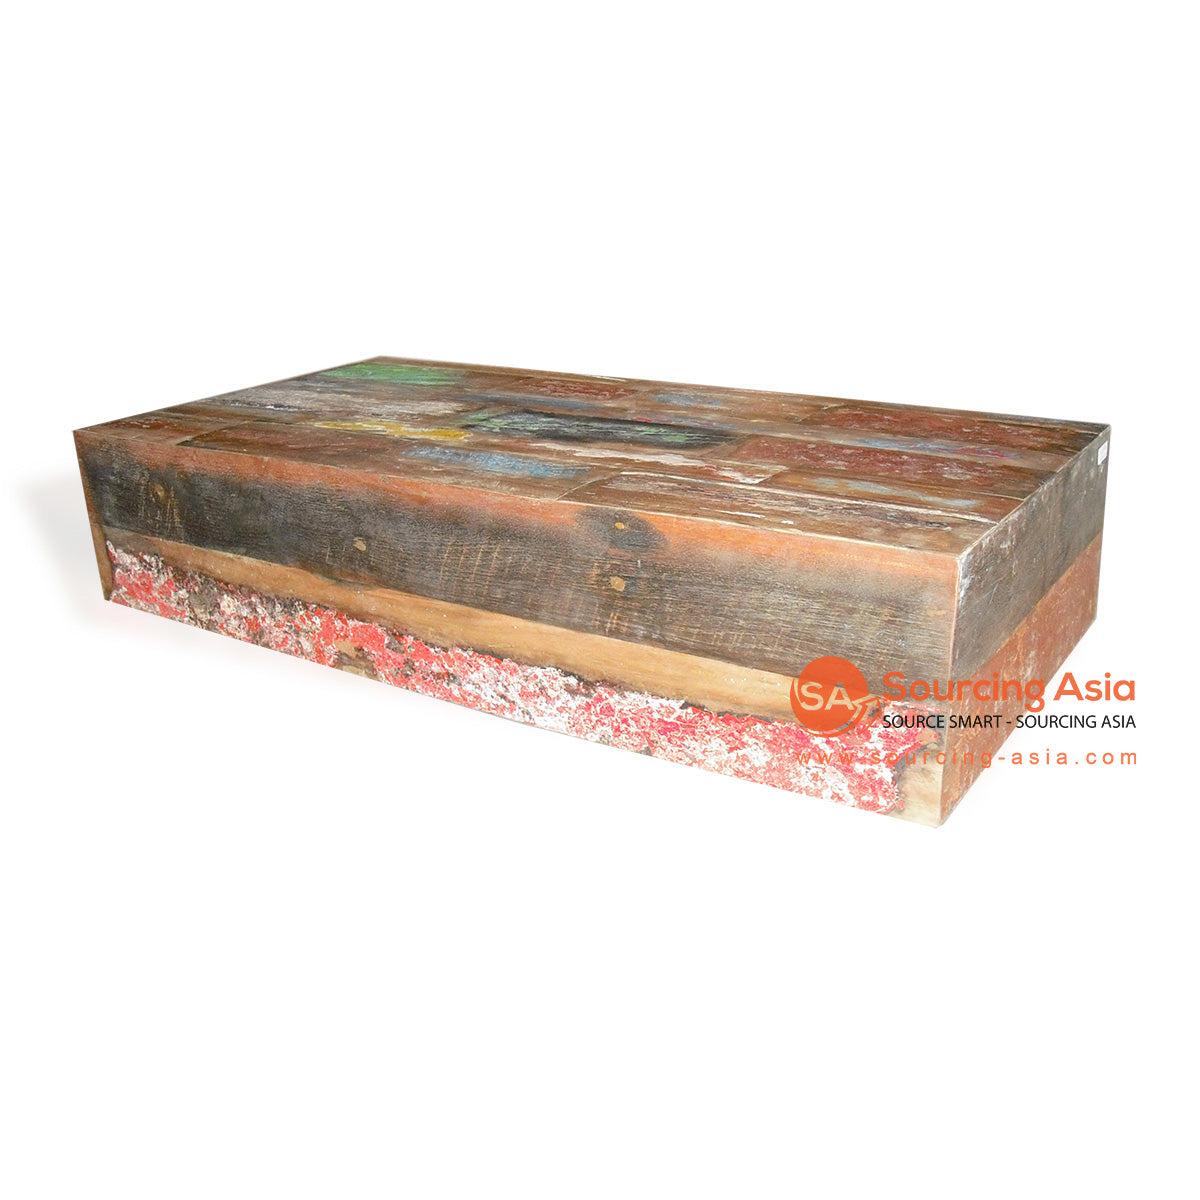 WK005-120 NATURAL RECYCLED BOAT WOOD RECTANGULAR SOLID BLOCK COFFEE TABLE